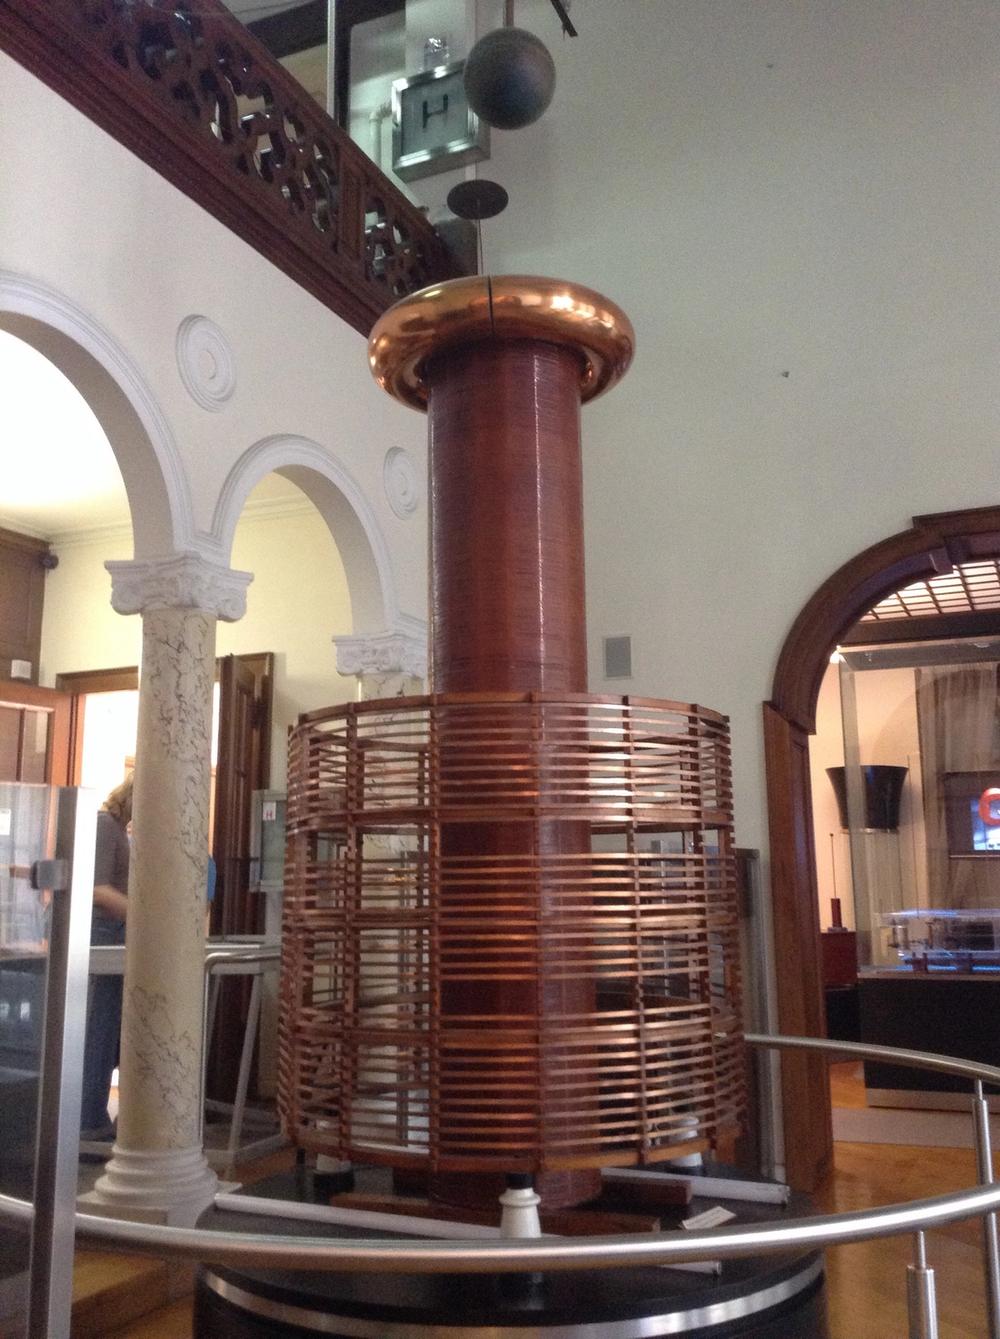 Large rounded copper coil artefact from Tesla